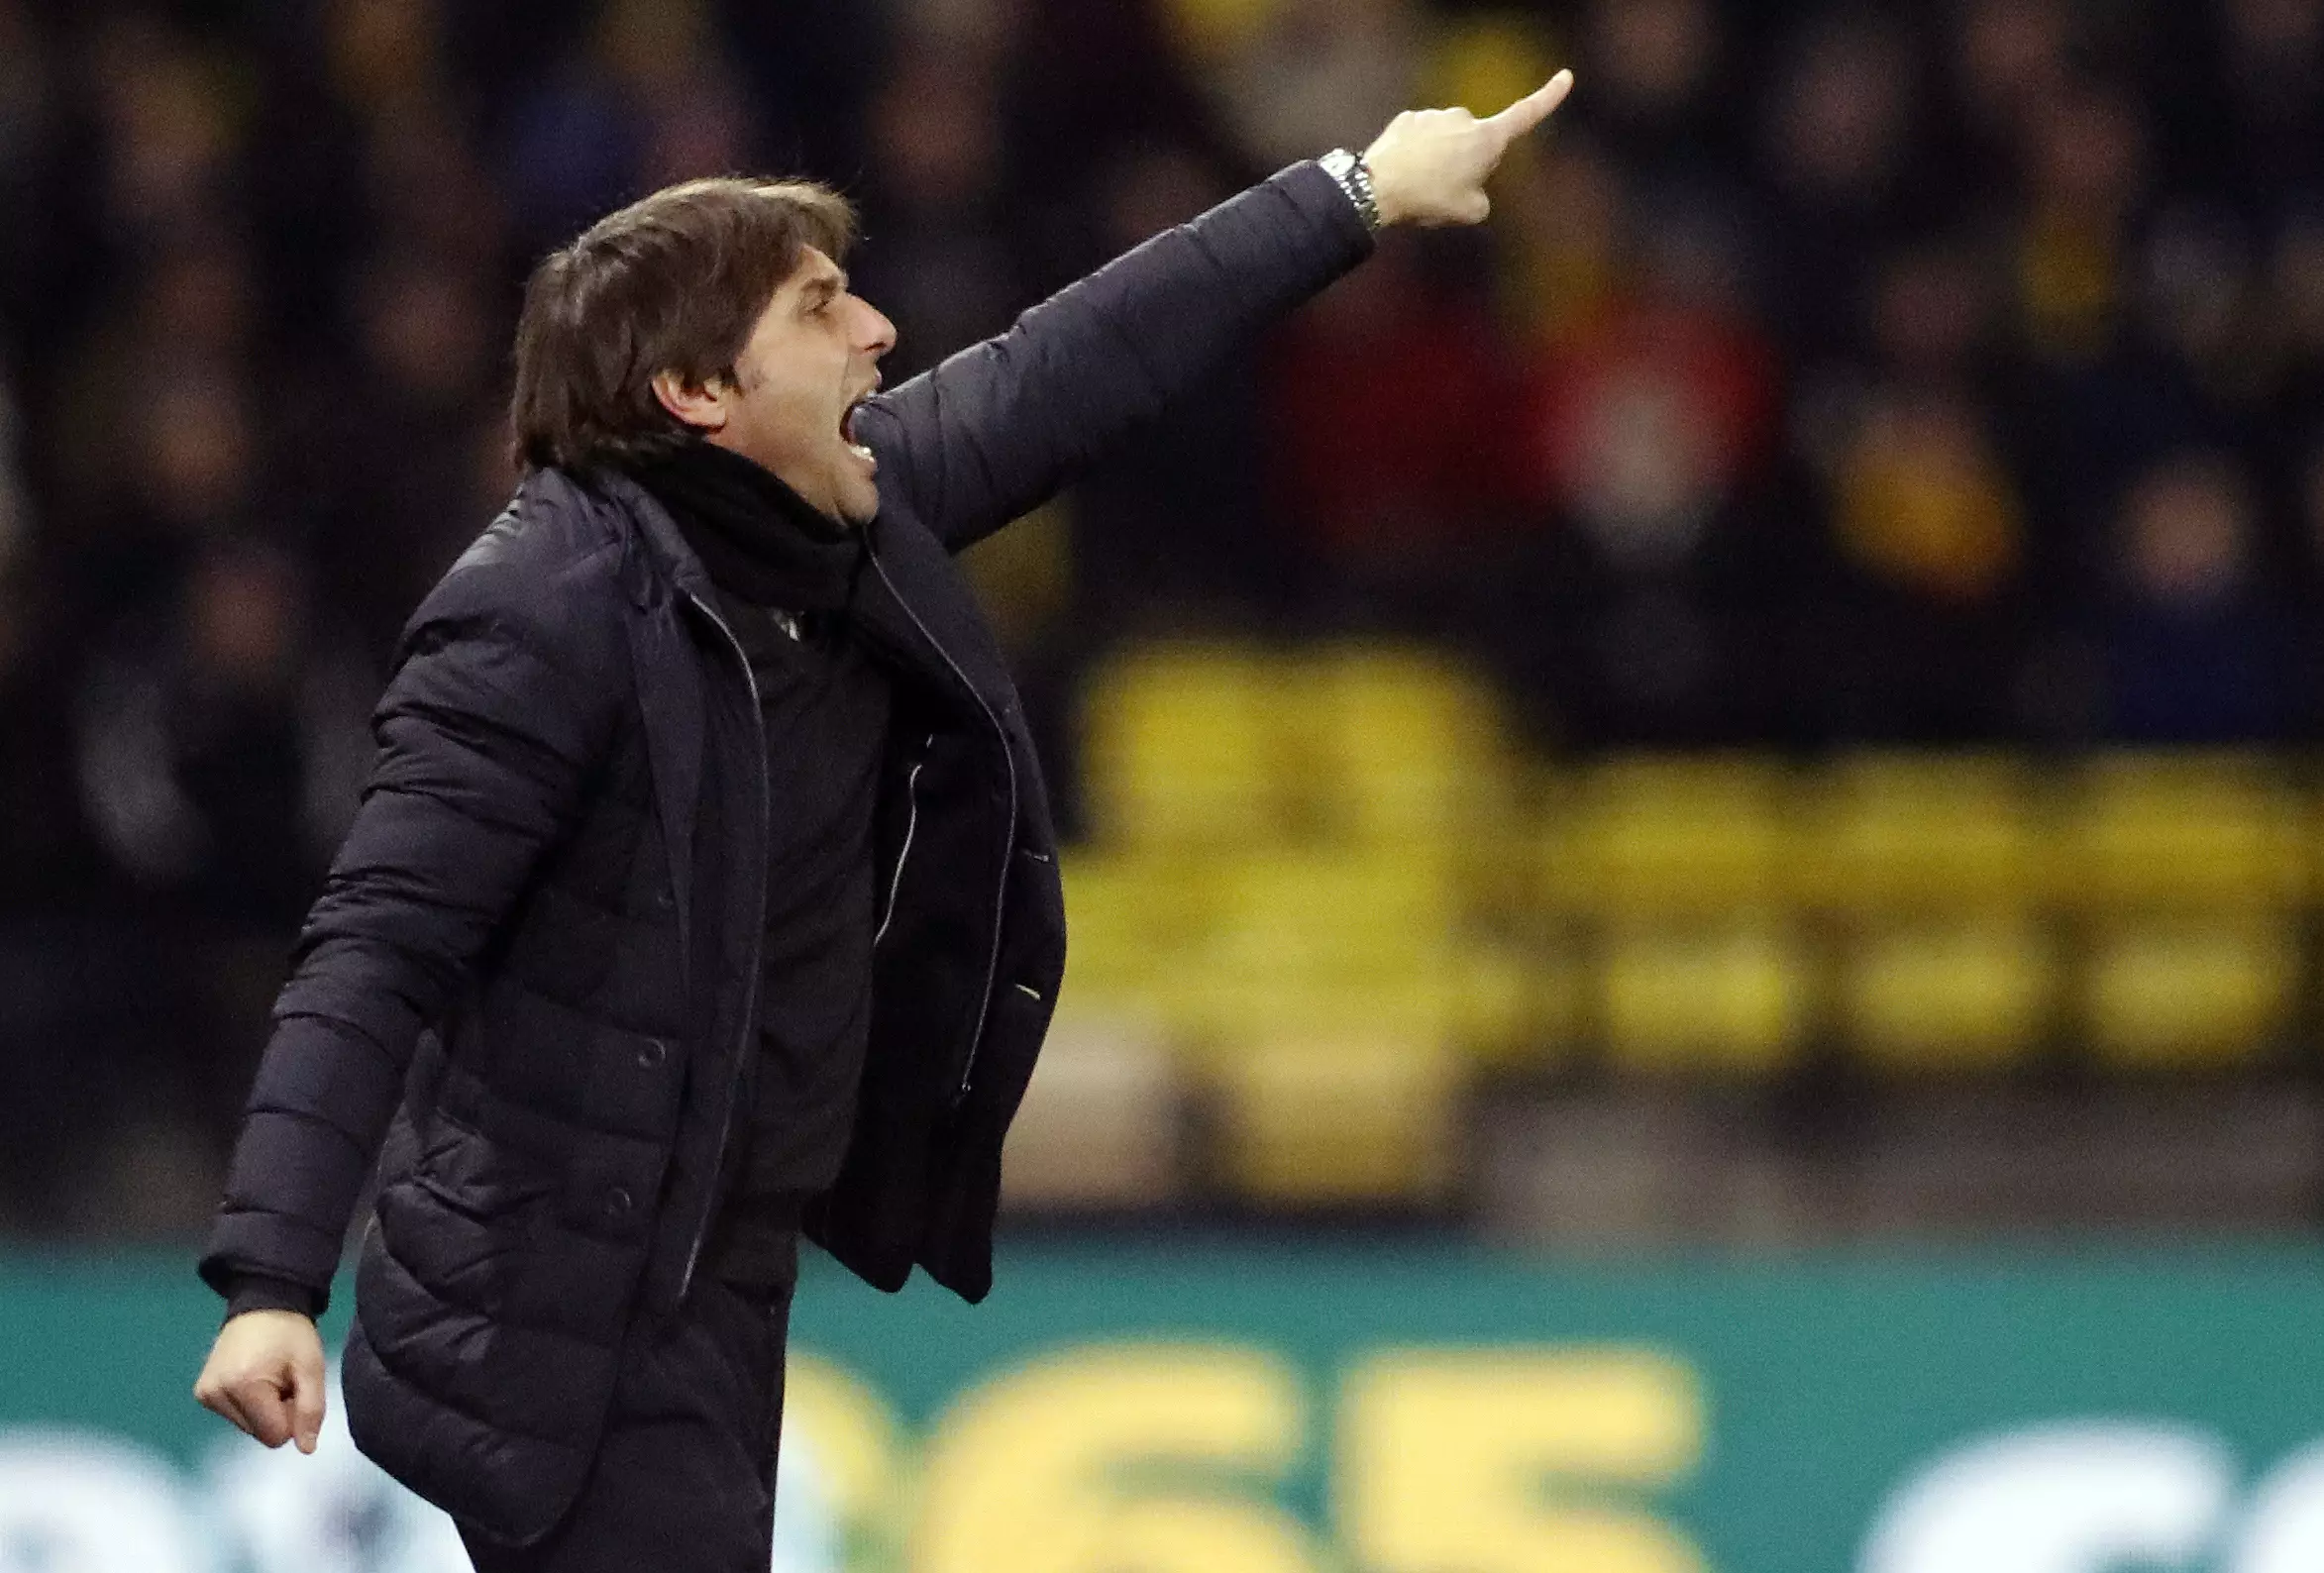 Conte barks out orders from the touchline. Image: PA